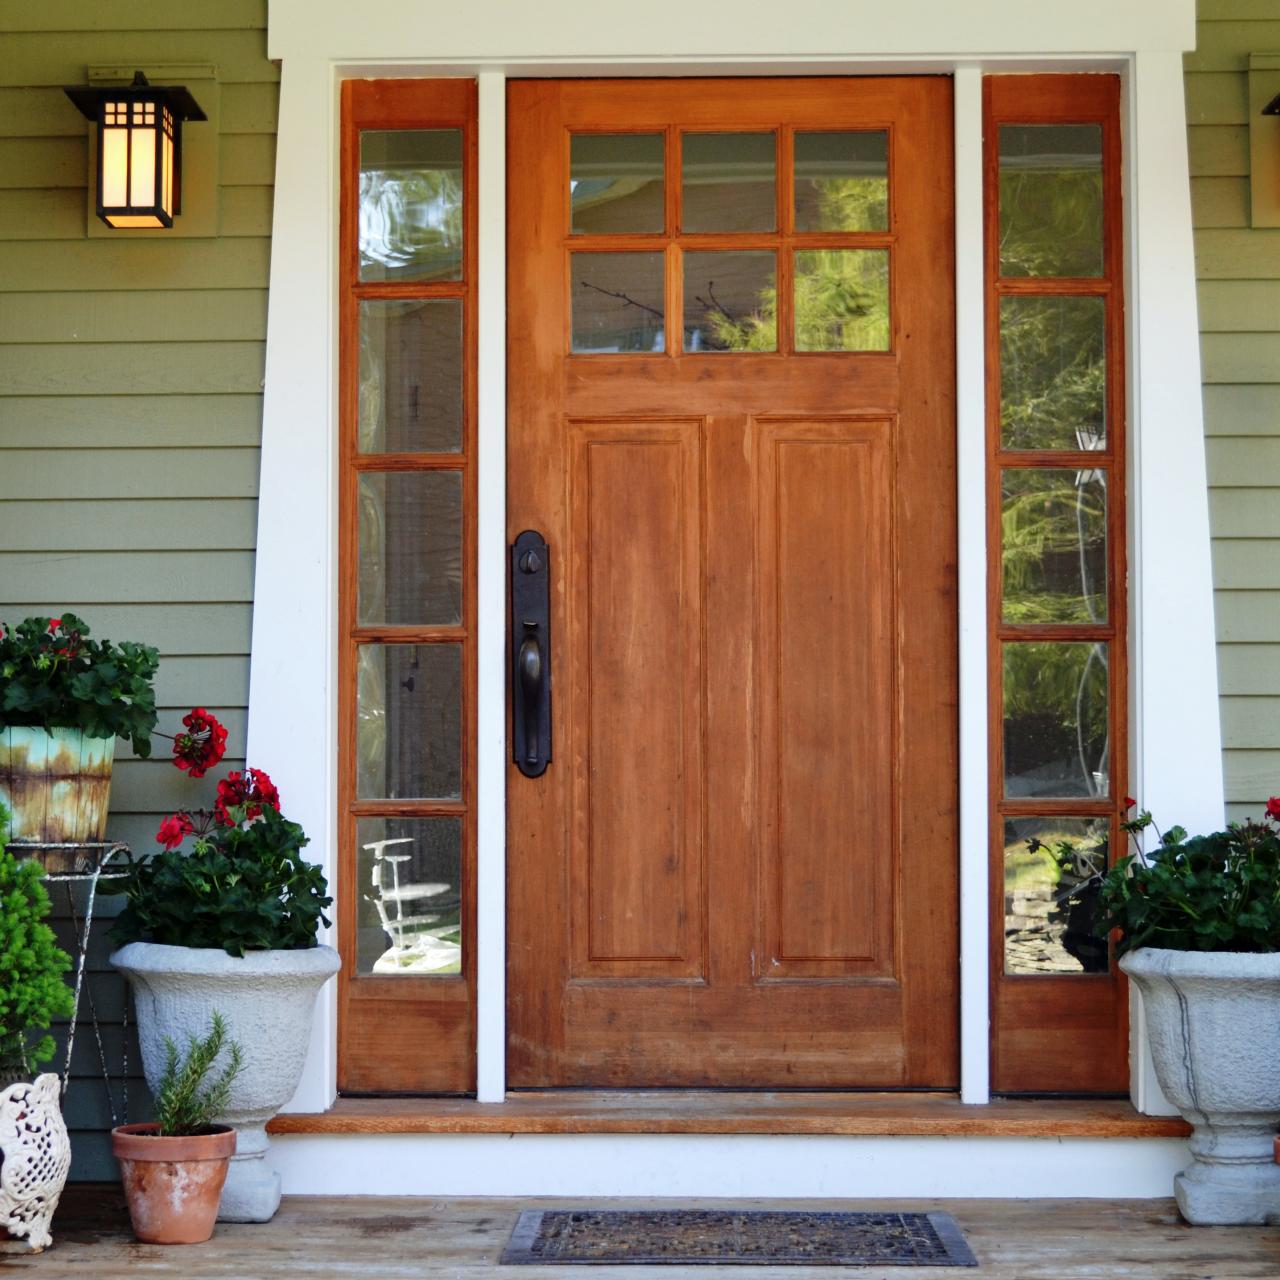 Summer Front-Porch Decor Ideas for the Best-Looking Porch on the Block